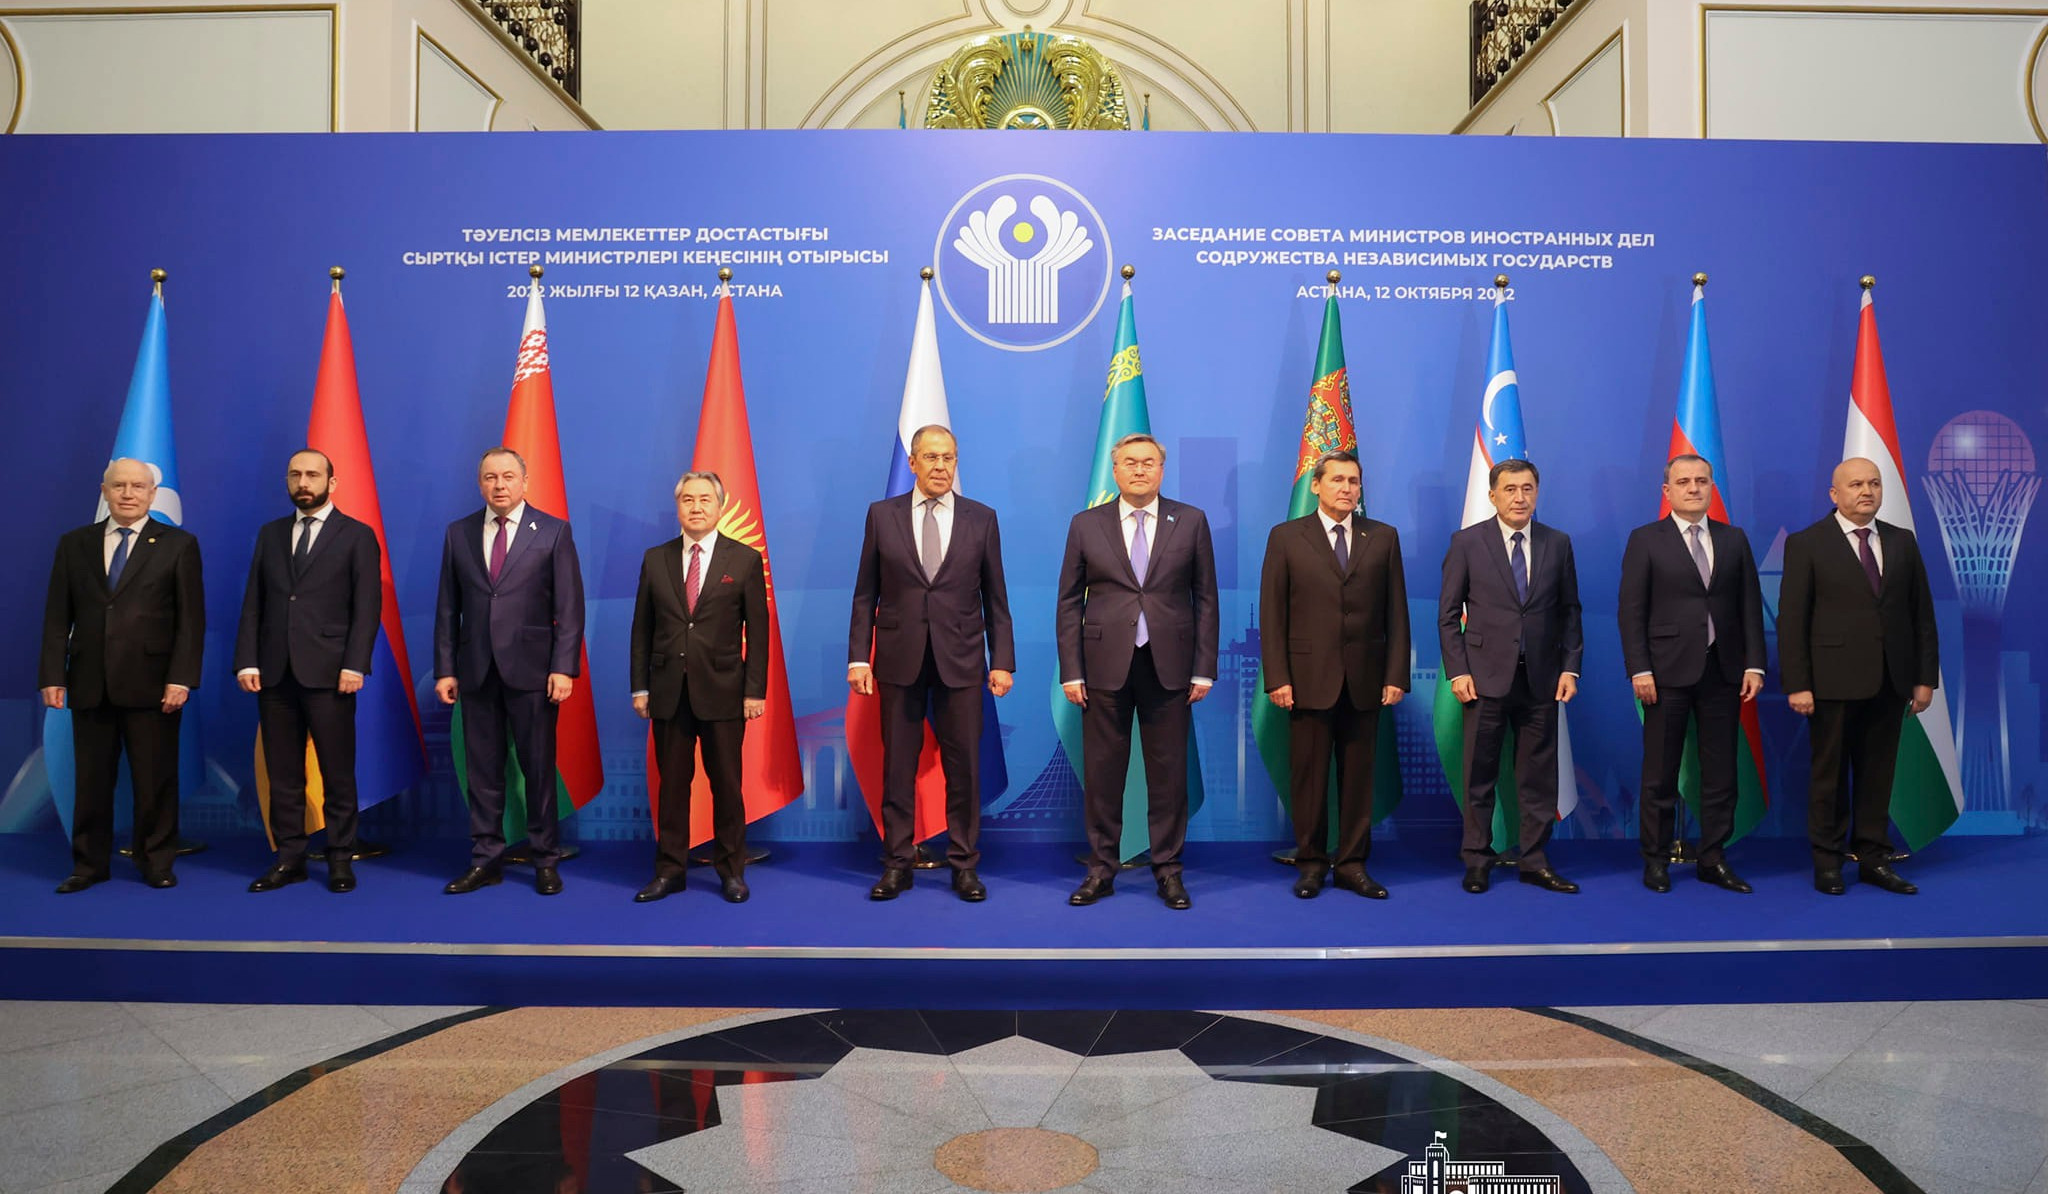 Session of Council of Foreign Ministers of CIS member states kicks off in Astana